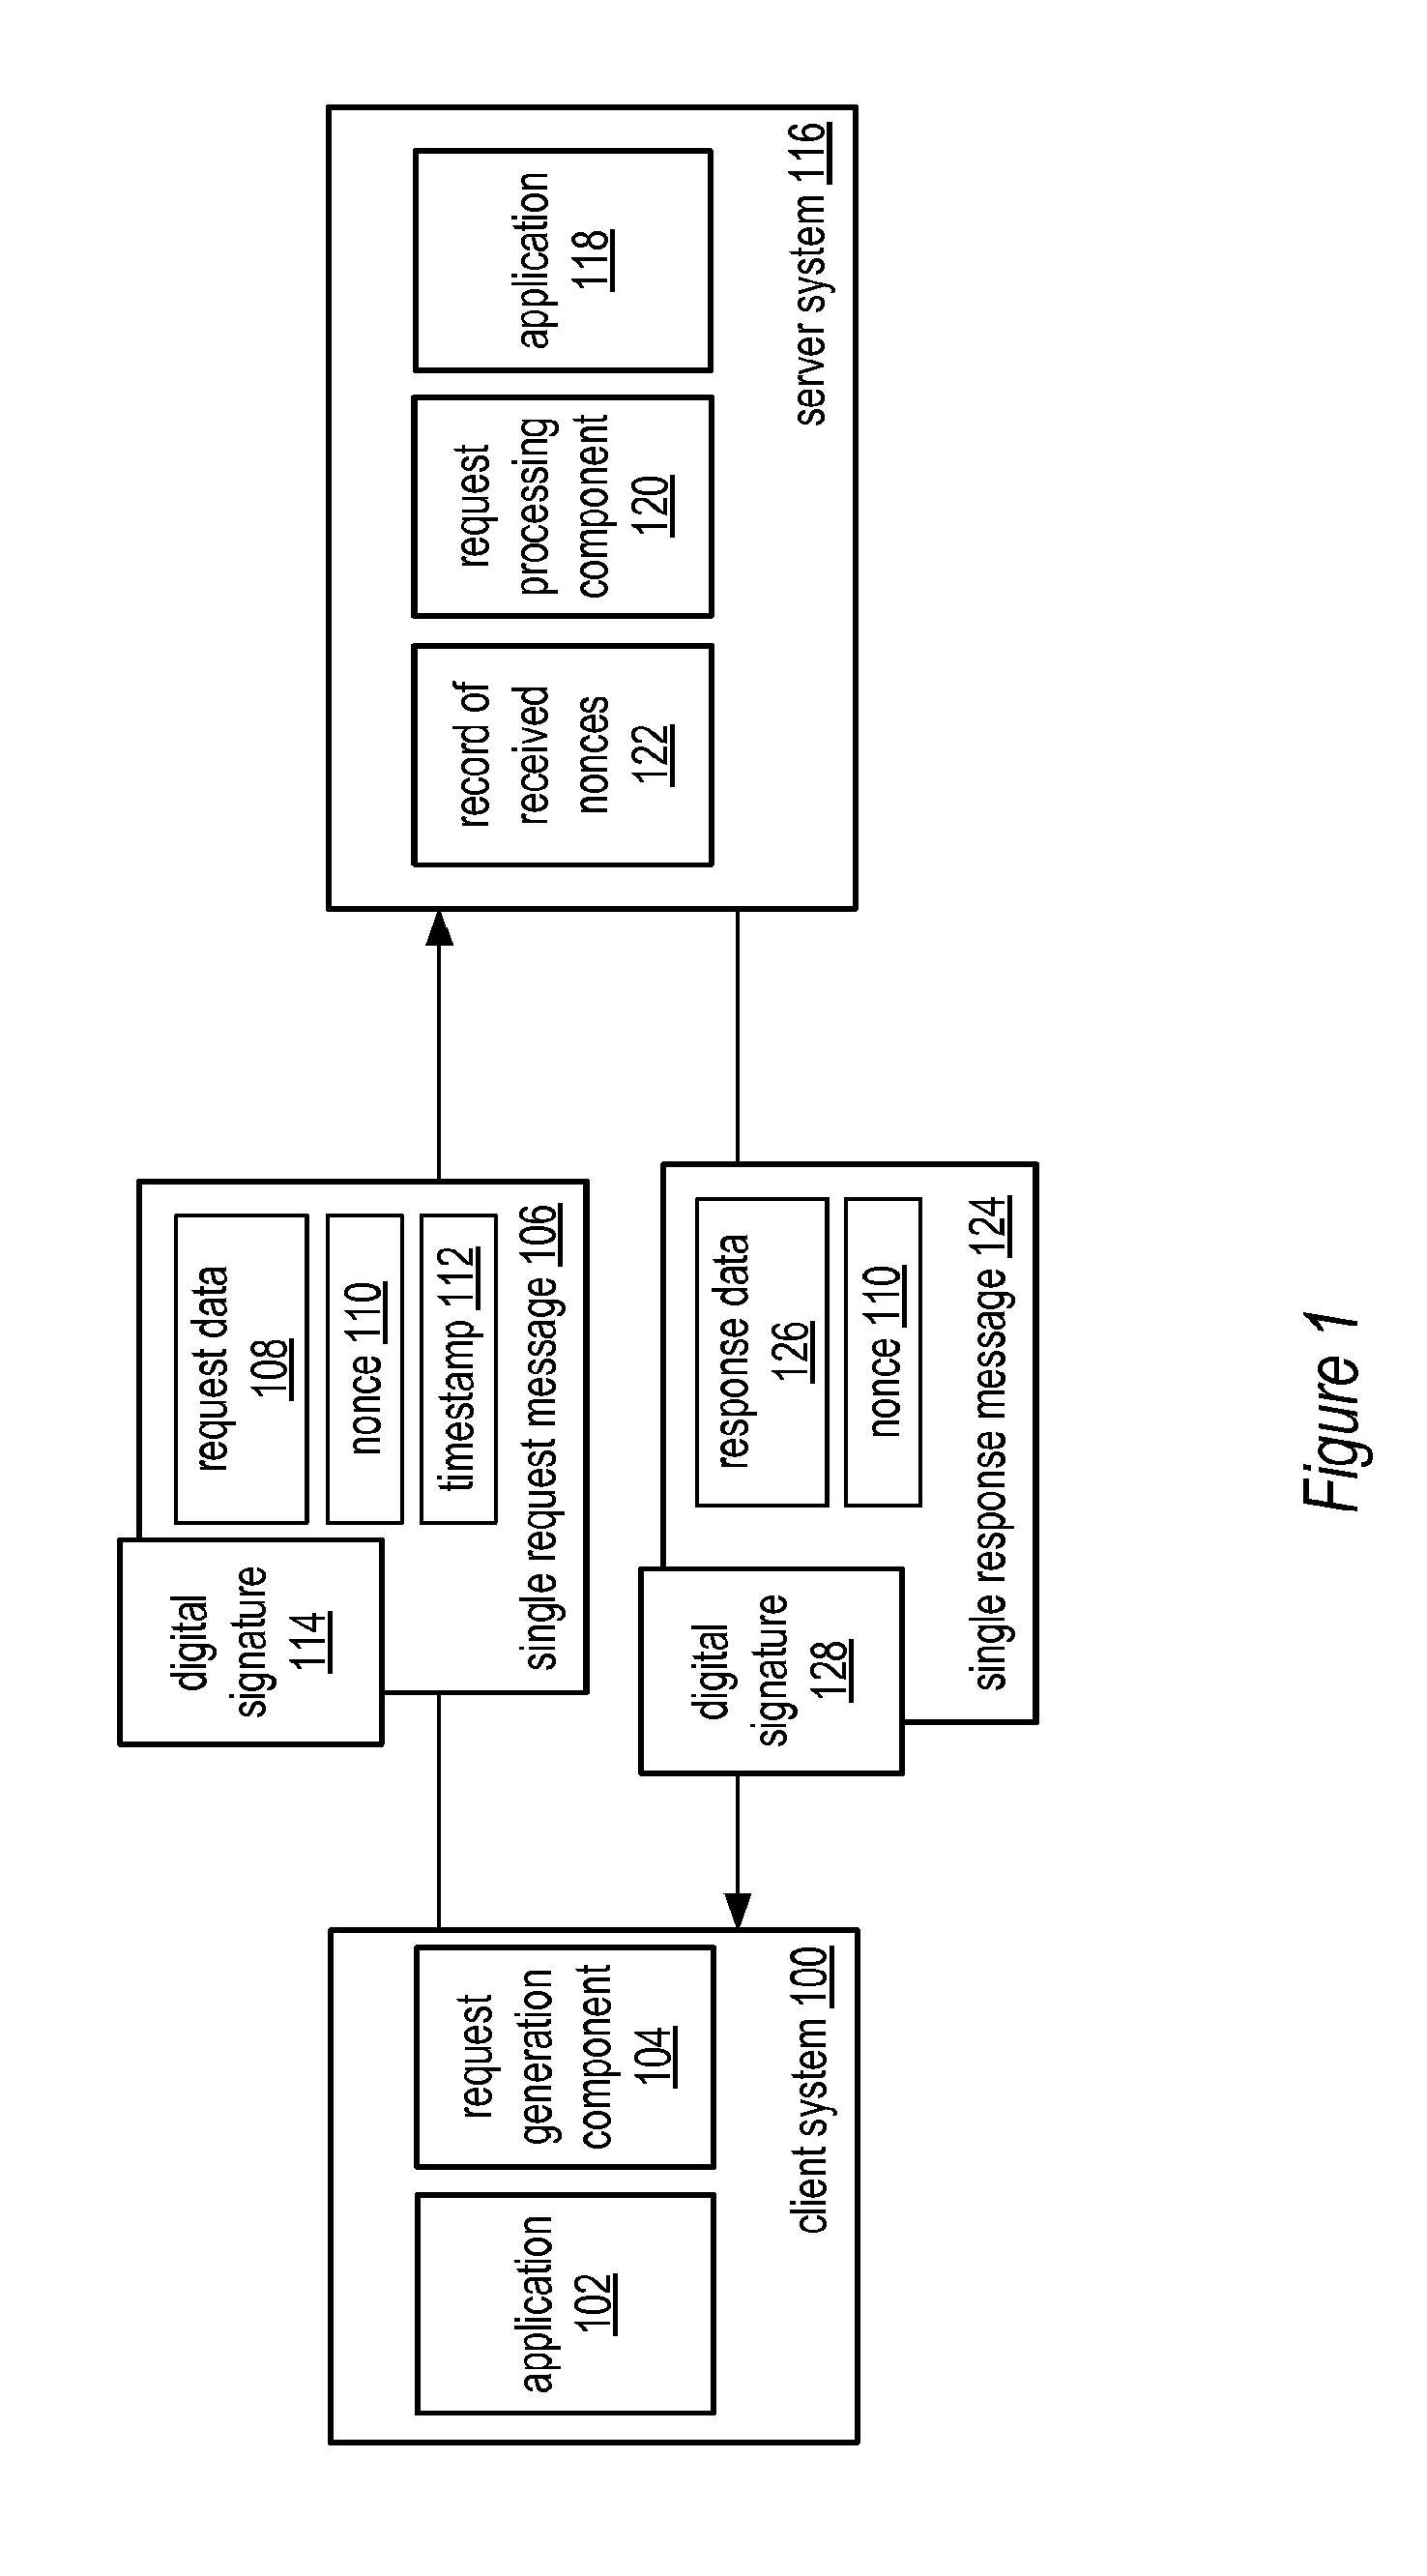 System and Method for a Single Request - Single Response Protocol with Mutual Replay Attack Protection